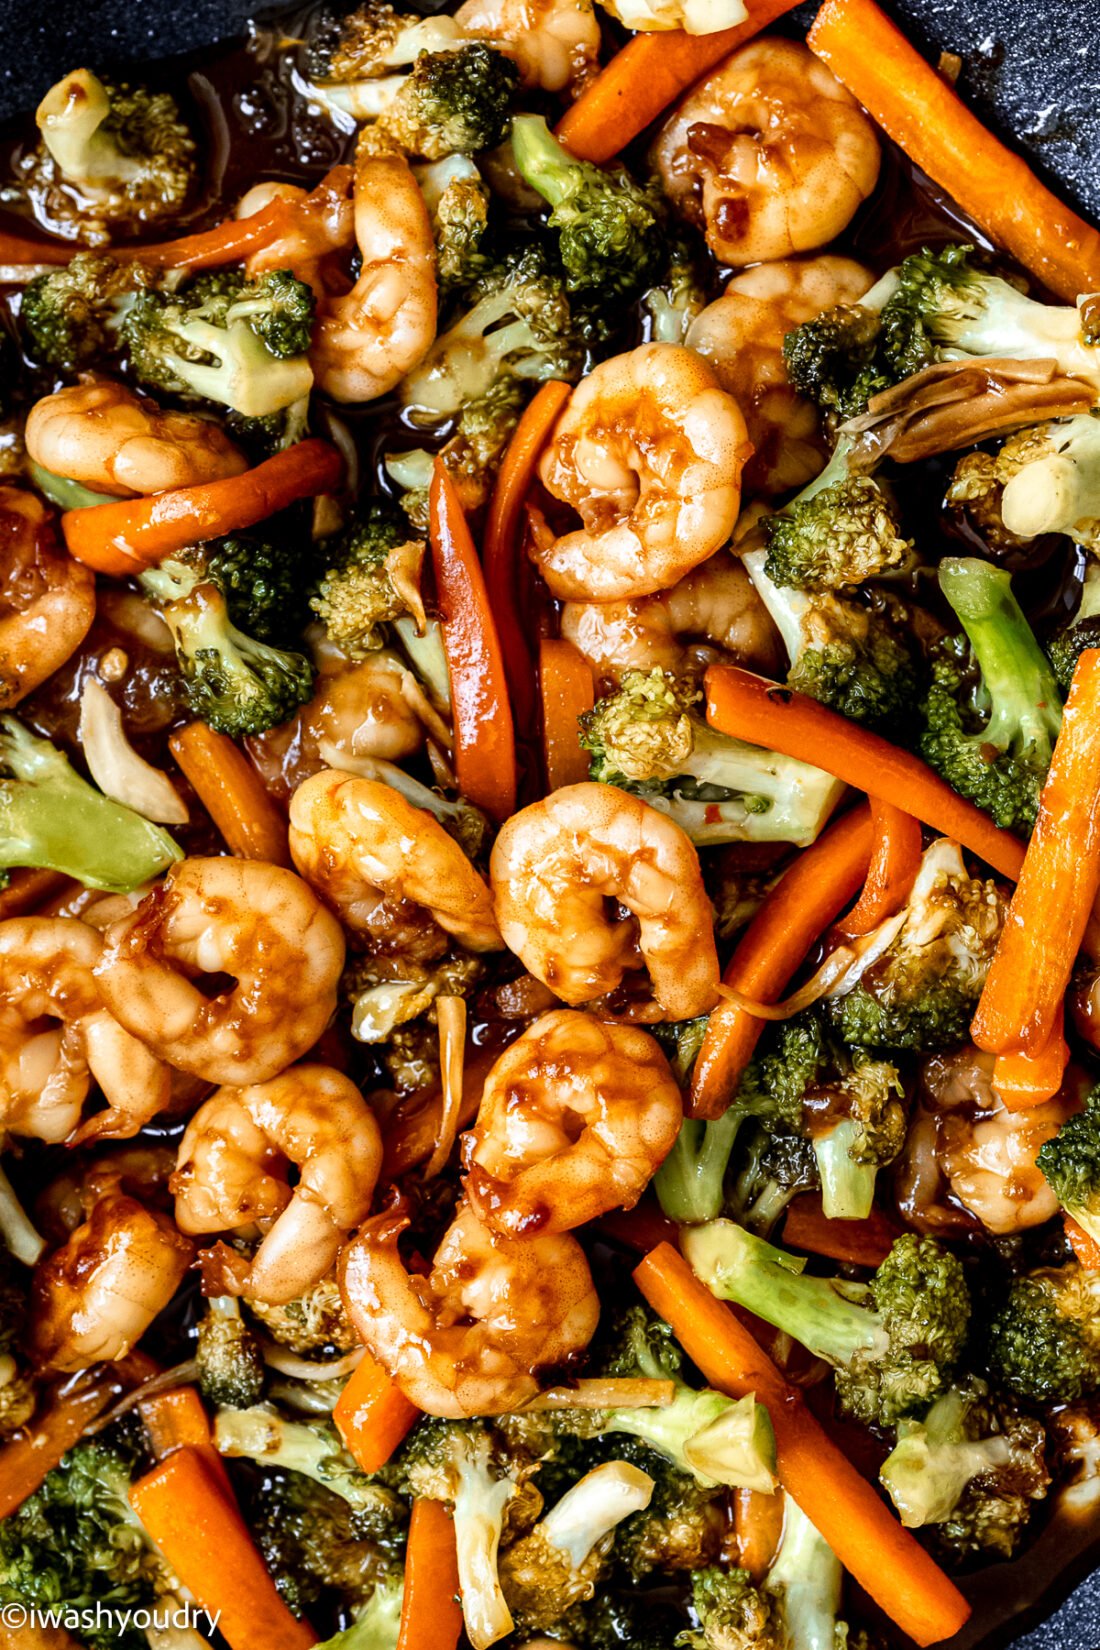 shrimp and broccoli with carrots in sauce.